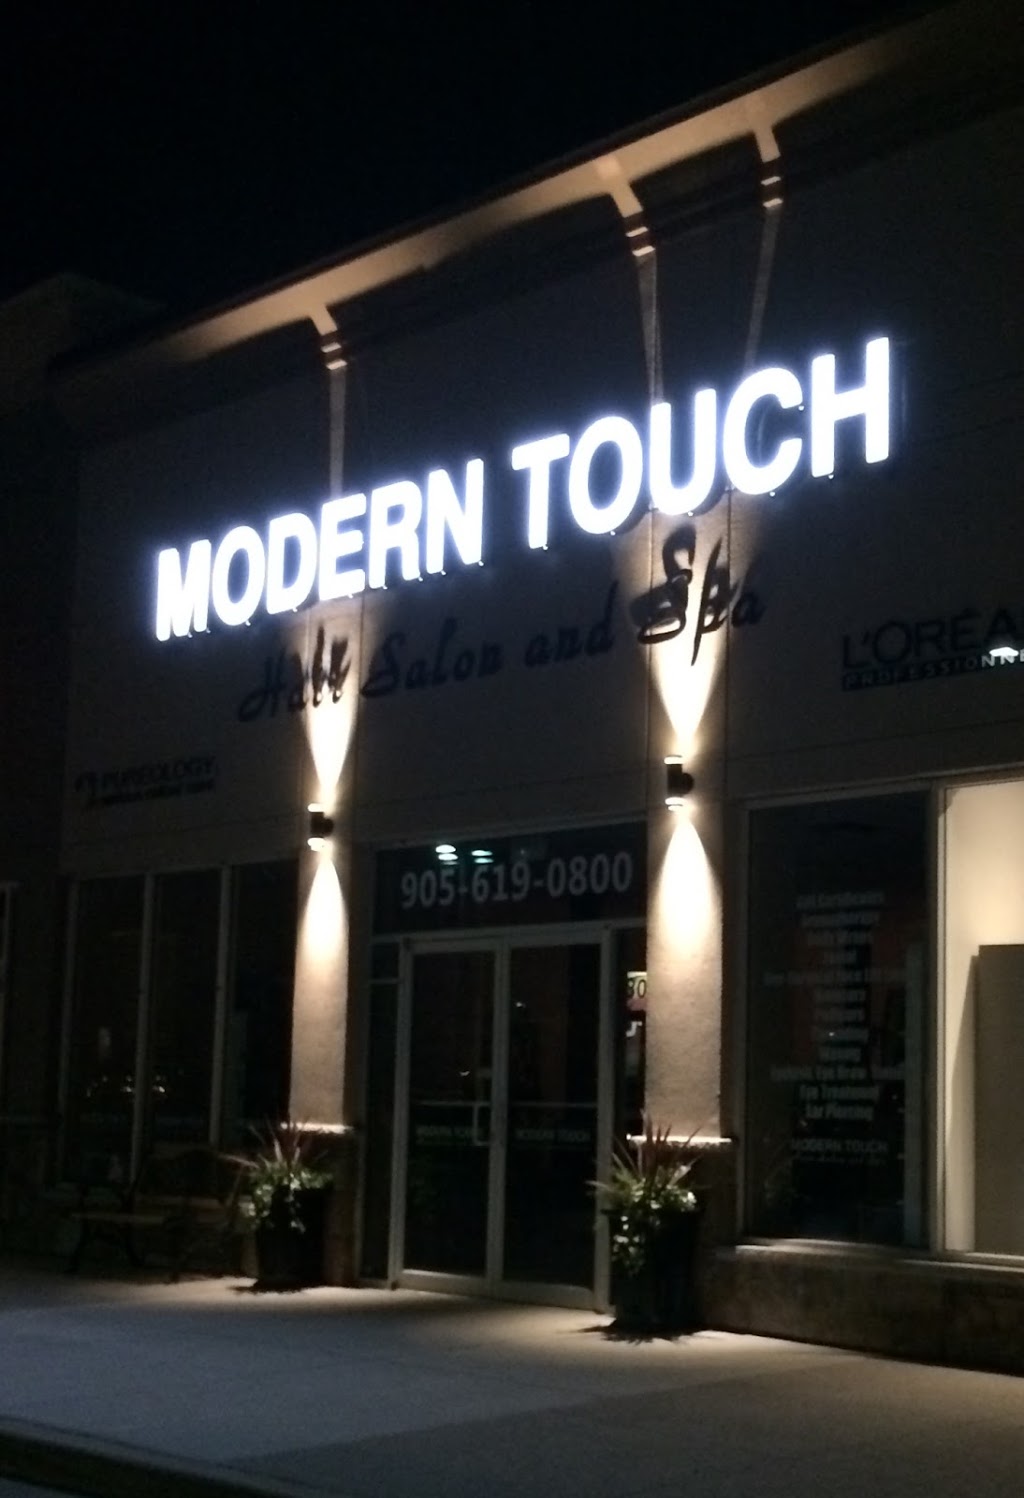 Modern Touch Hair Salon and Spa Pickering | 1755 Pickering Pkwy #22, Pickering, ON L1V 6K5, Canada | Phone: (905) 619-0800